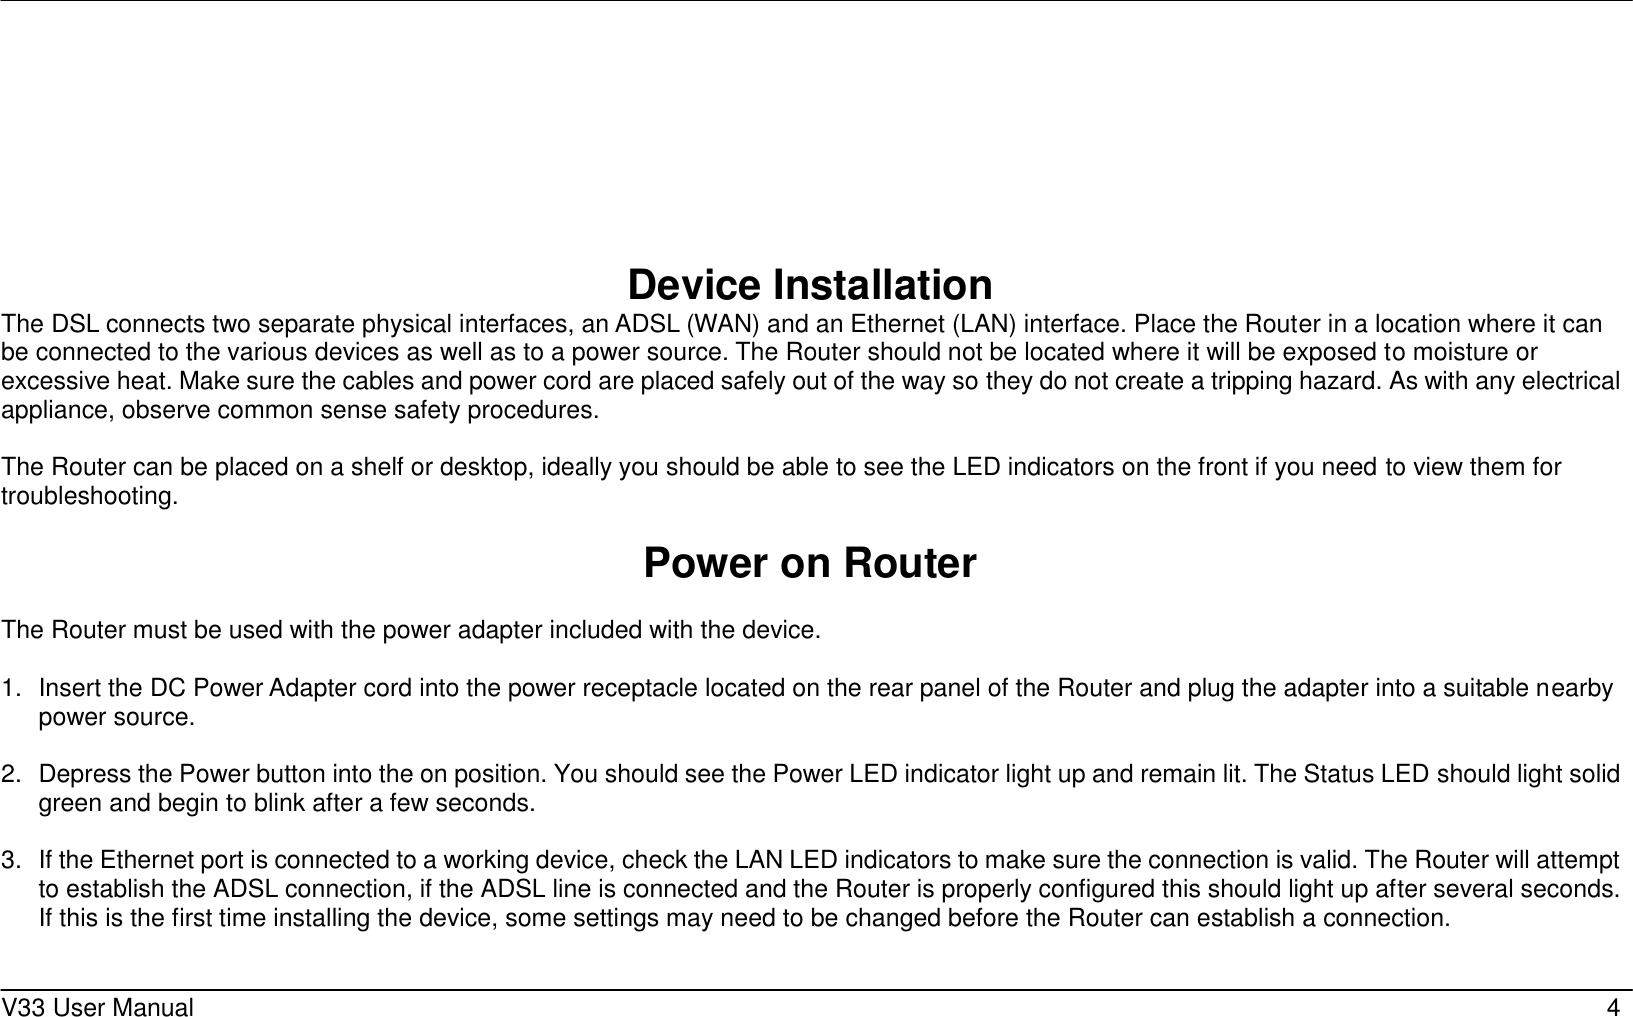     V33 User Manual   4         Device Installation The DSL connects two separate physical interfaces, an ADSL (WAN) and an Ethernet (LAN) interface. Place the Router in a location where it can be connected to the various devices as well as to a power source. The Router should not be located where it will be exposed to moisture or excessive heat. Make sure the cables and power cord are placed safely out of the way so they do not create a tripping hazard. As with any electrical appliance, observe common sense safety procedures.  The Router can be placed on a shelf or desktop, ideally you should be able to see the LED indicators on the front if you need to view them for troubleshooting.  Power on Router  The Router must be used with the power adapter included with the device.  1.  Insert the DC Power Adapter cord into the power receptacle located on the rear panel of the Router and plug the adapter into a suitable nearby power source.  2.  Depress the Power button into the on position. You should see the Power LED indicator light up and remain lit. The Status LED should light solid green and begin to blink after a few seconds.  3.  If the Ethernet port is connected to a working device, check the LAN LED indicators to make sure the connection is valid. The Router will attempt to establish the ADSL connection, if the ADSL line is connected and the Router is properly configured this should light up after several seconds. If this is the first time installing the device, some settings may need to be changed before the Router can establish a connection.      